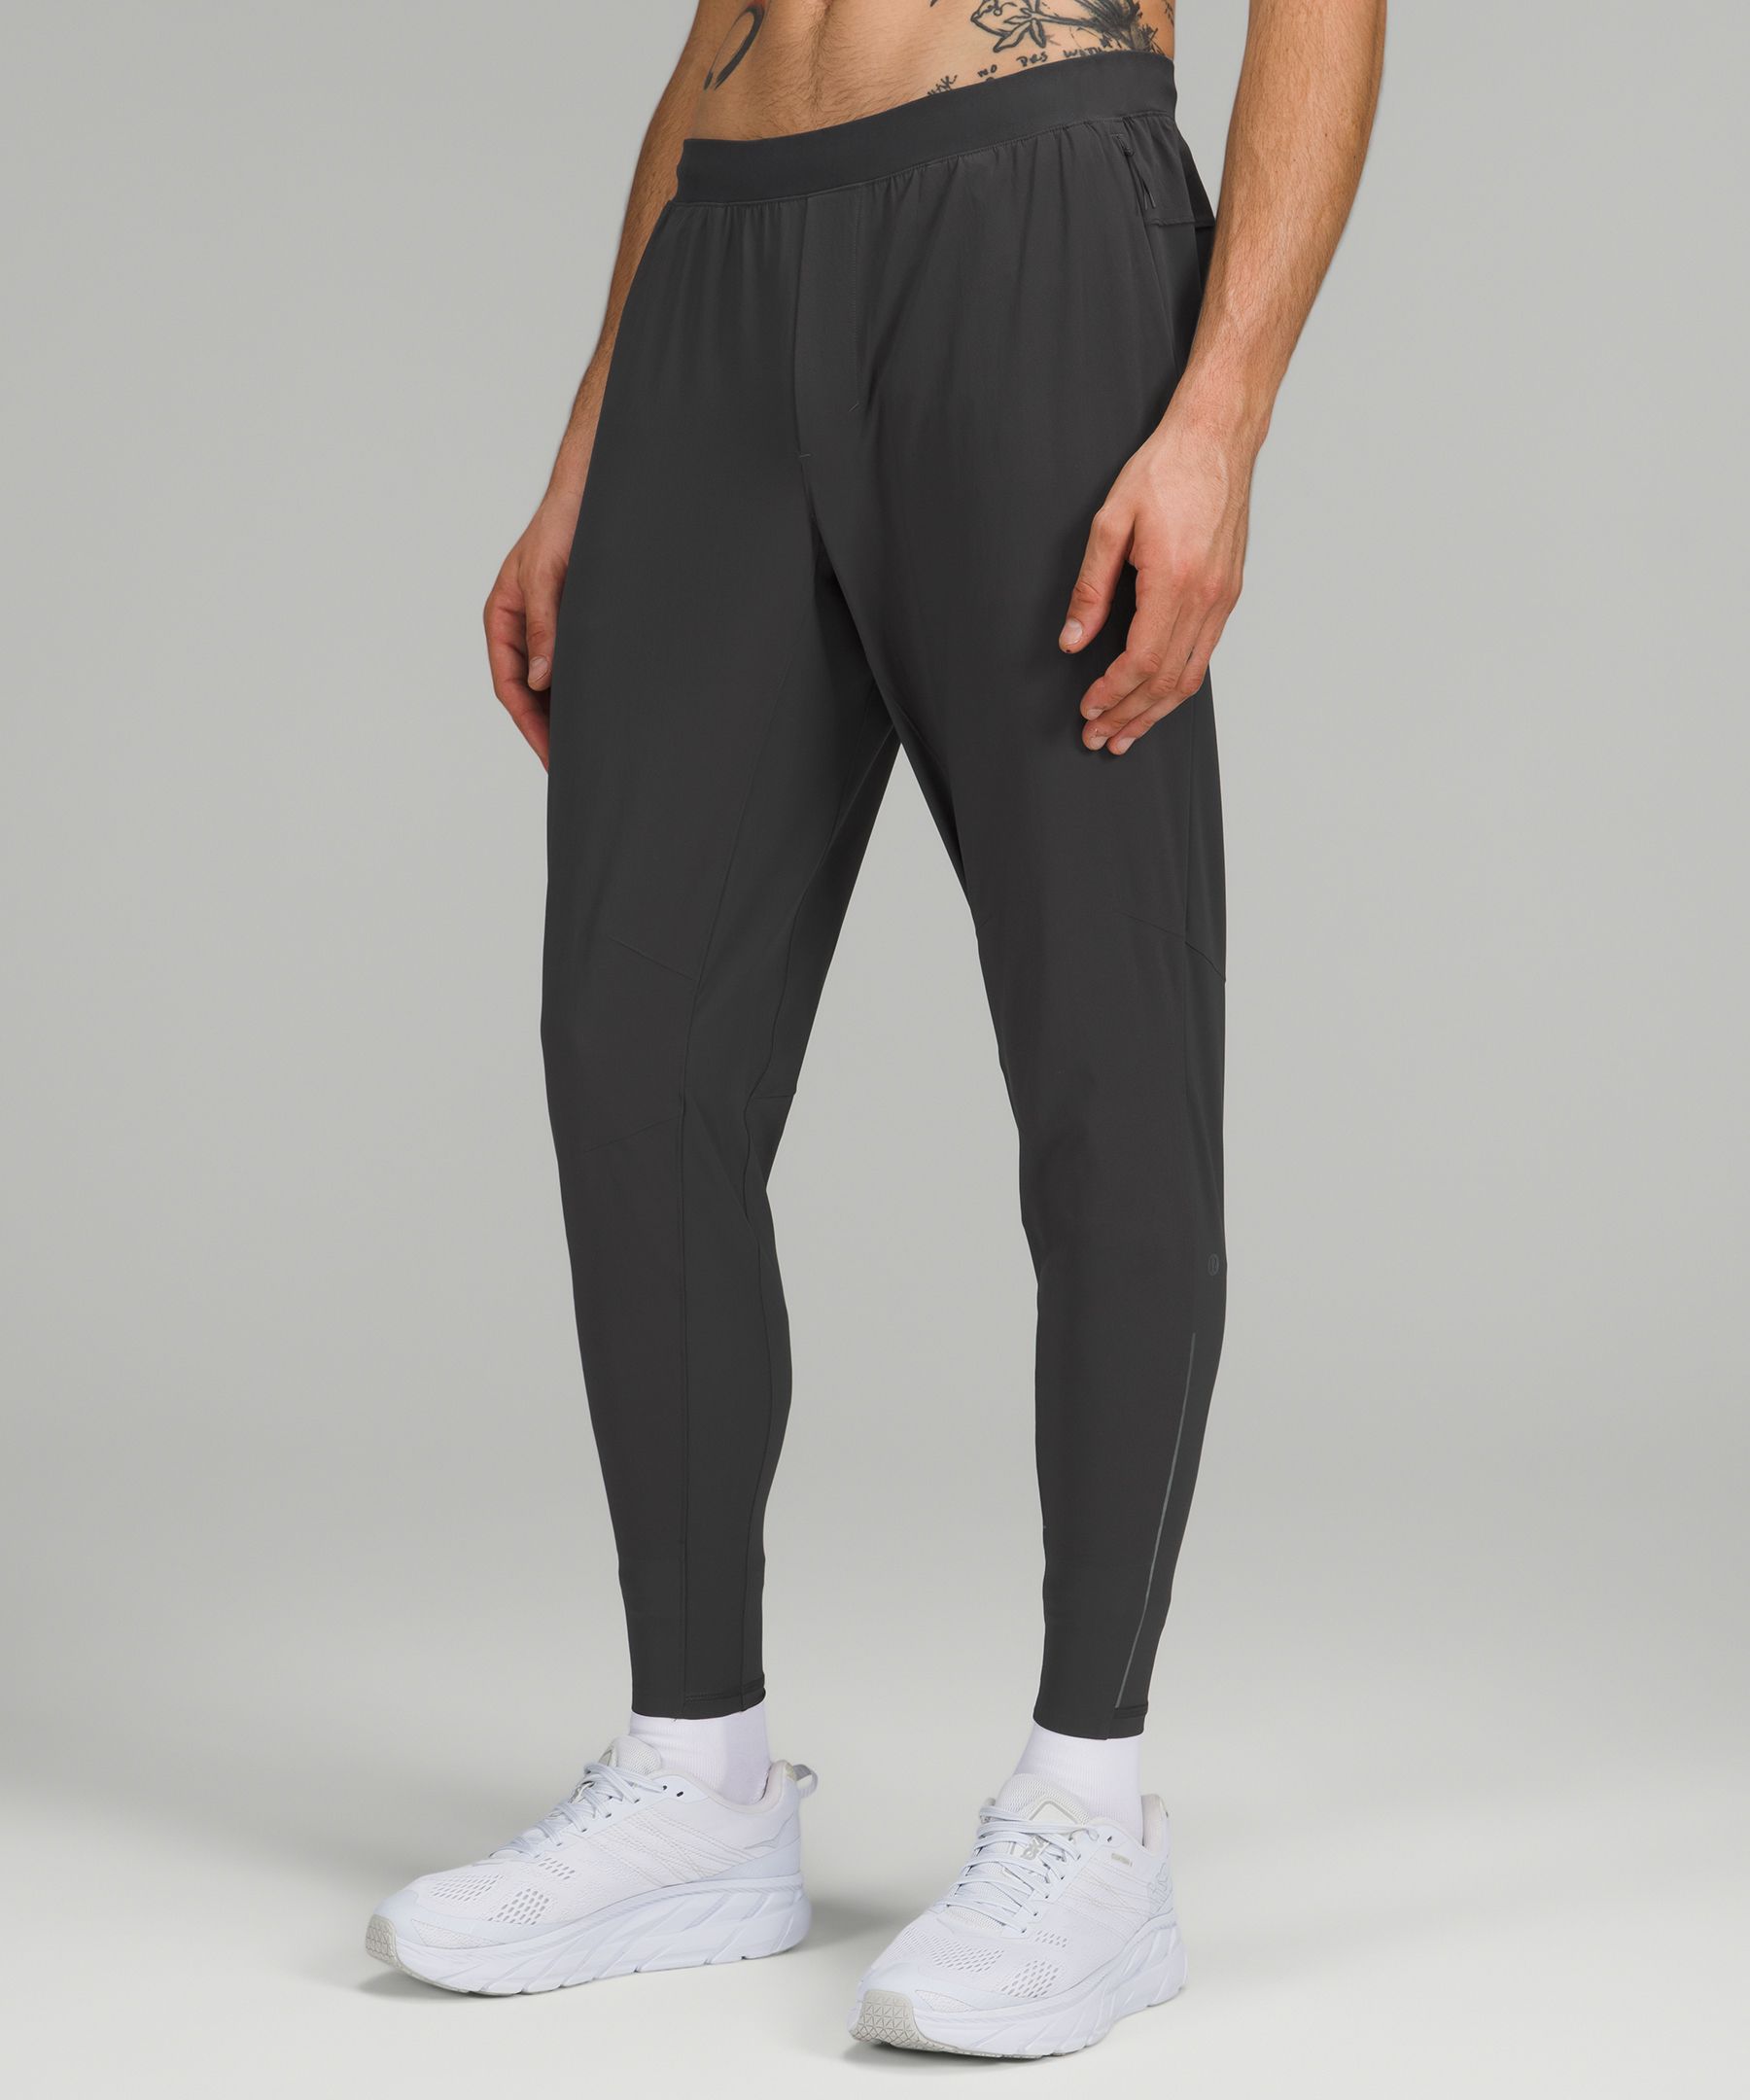 Surge Hybrid Pant 31 *Tall Online Only